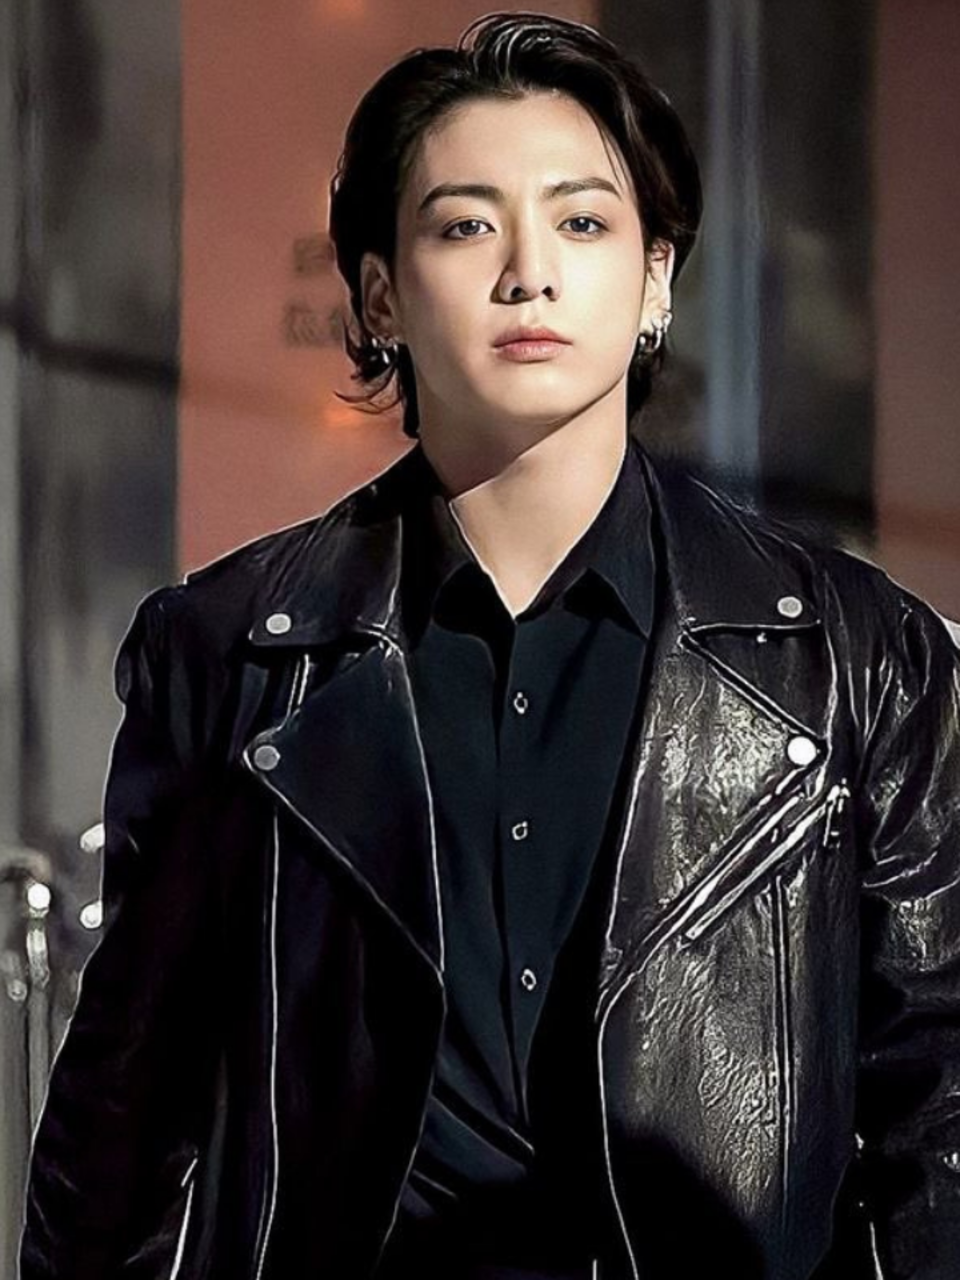 BTS' Jungkook looks dapper in leather jackets